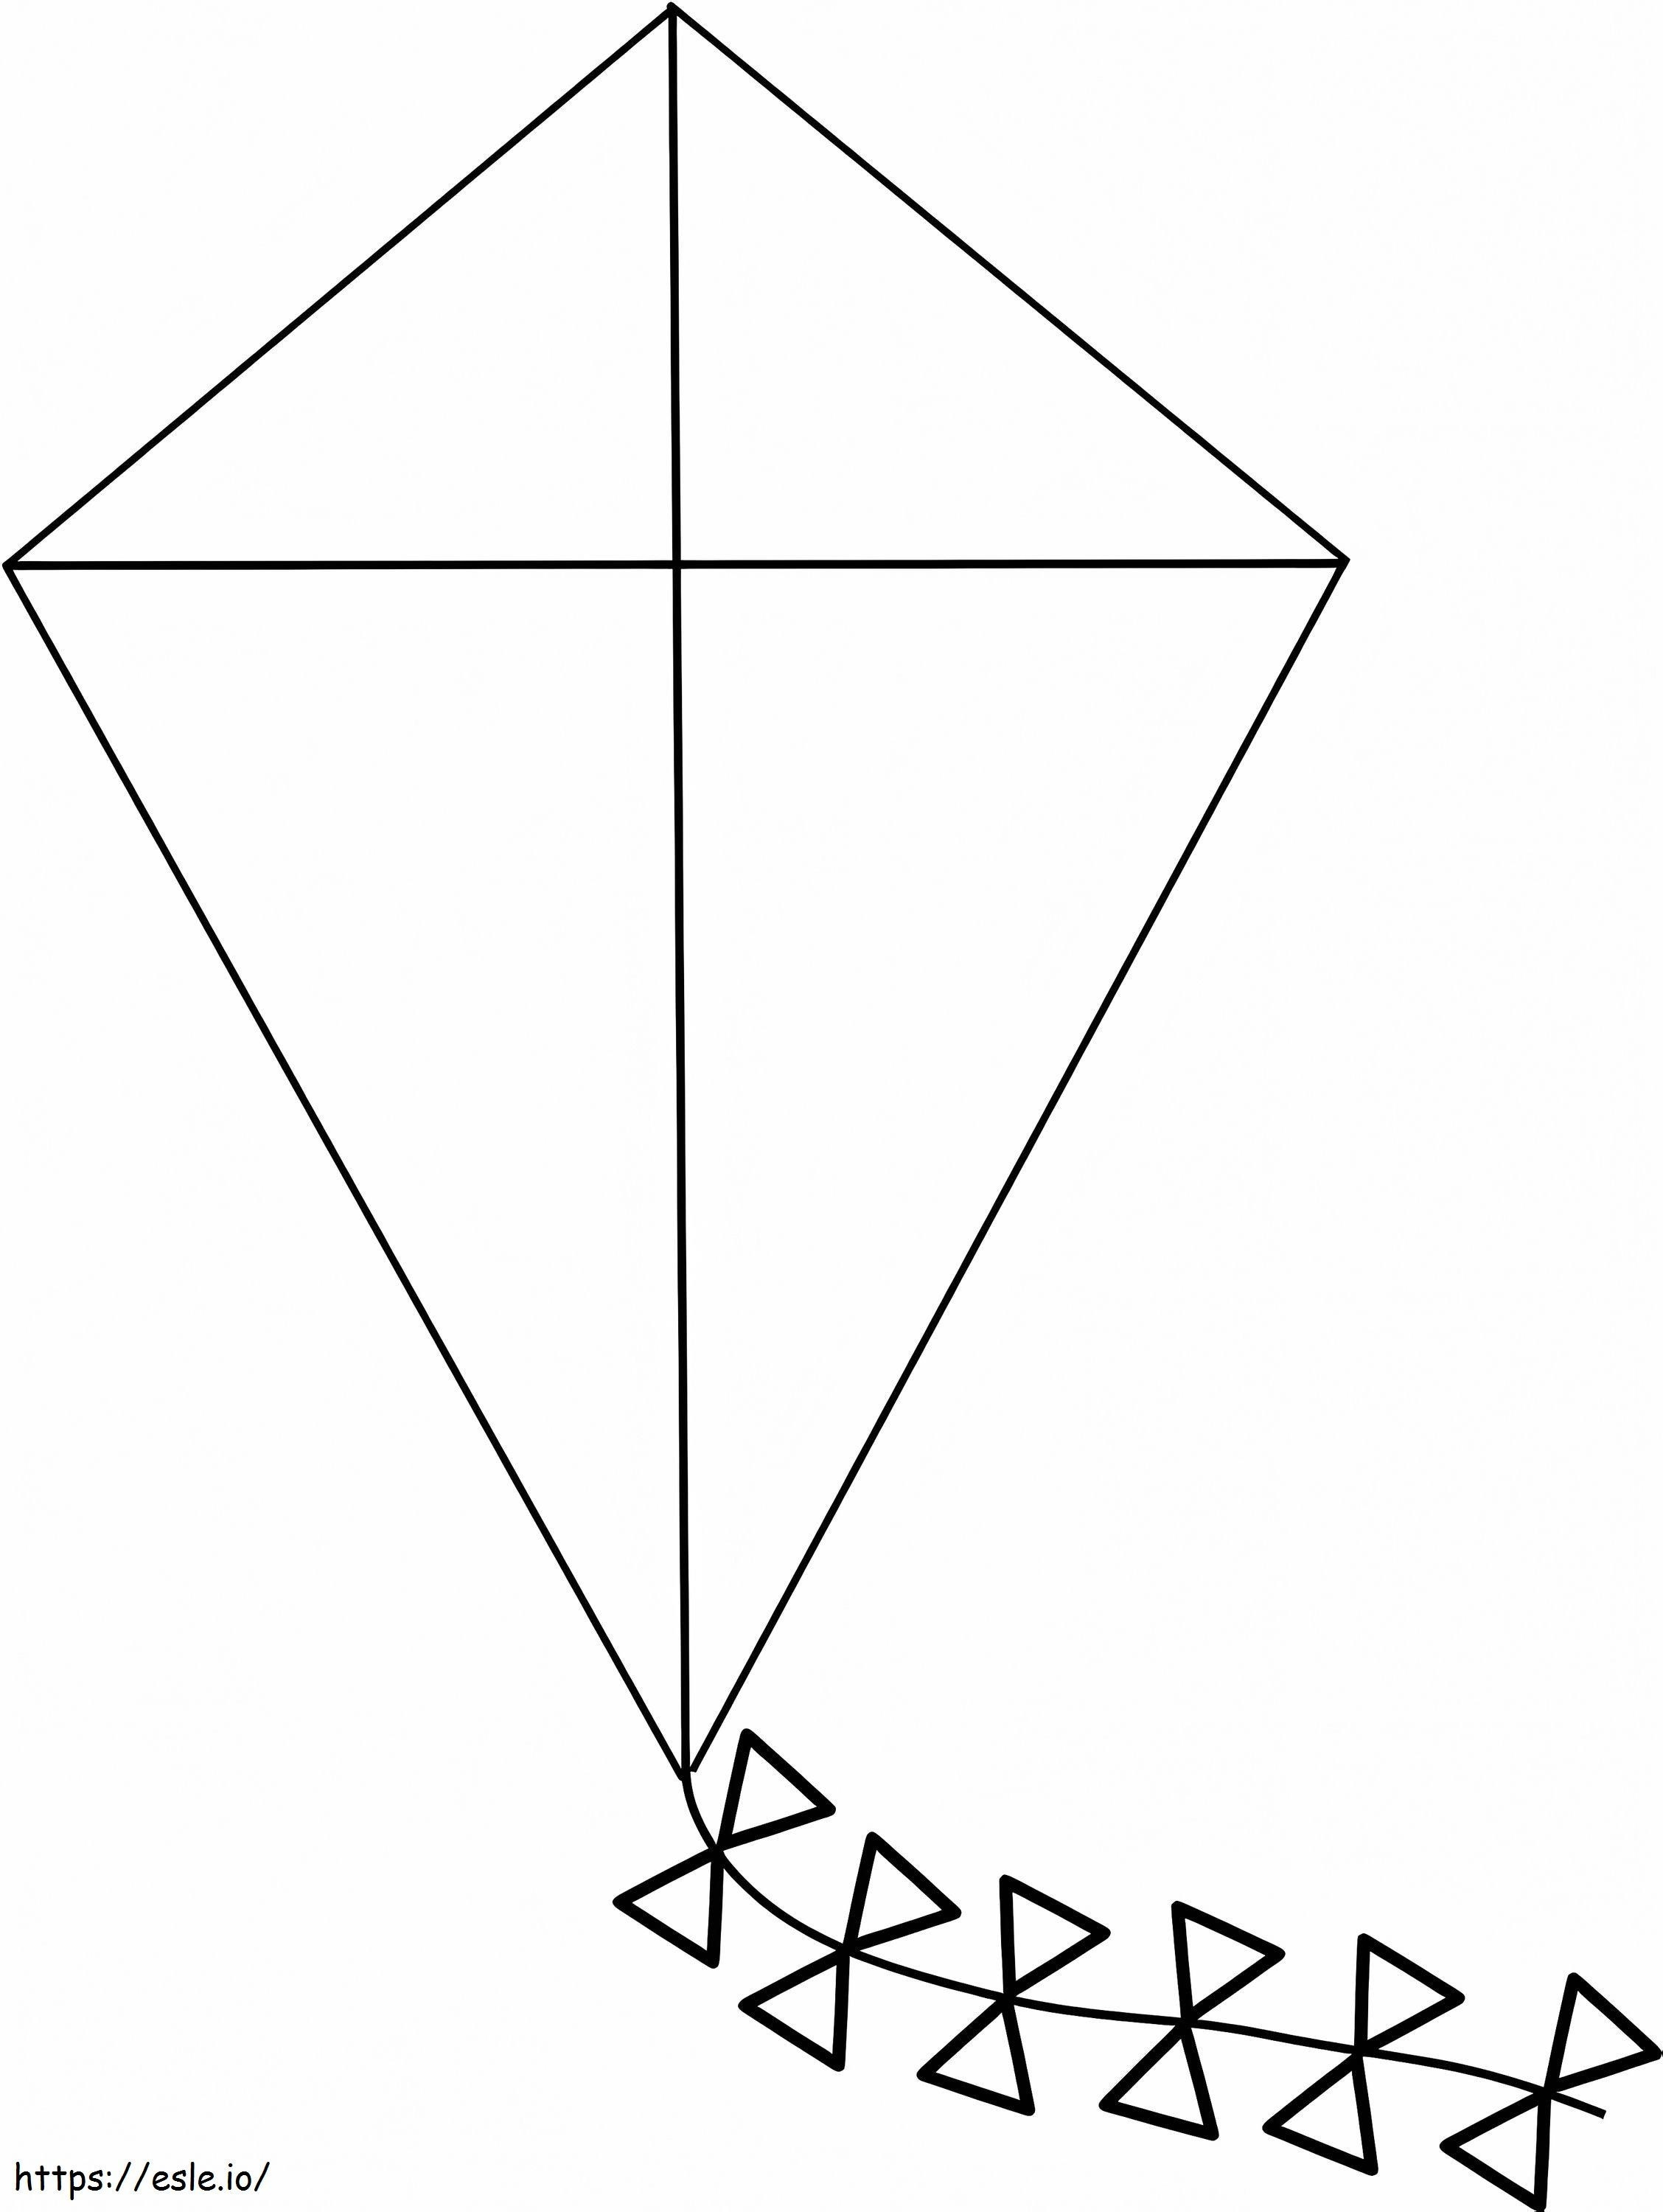 Kite 16 coloring page